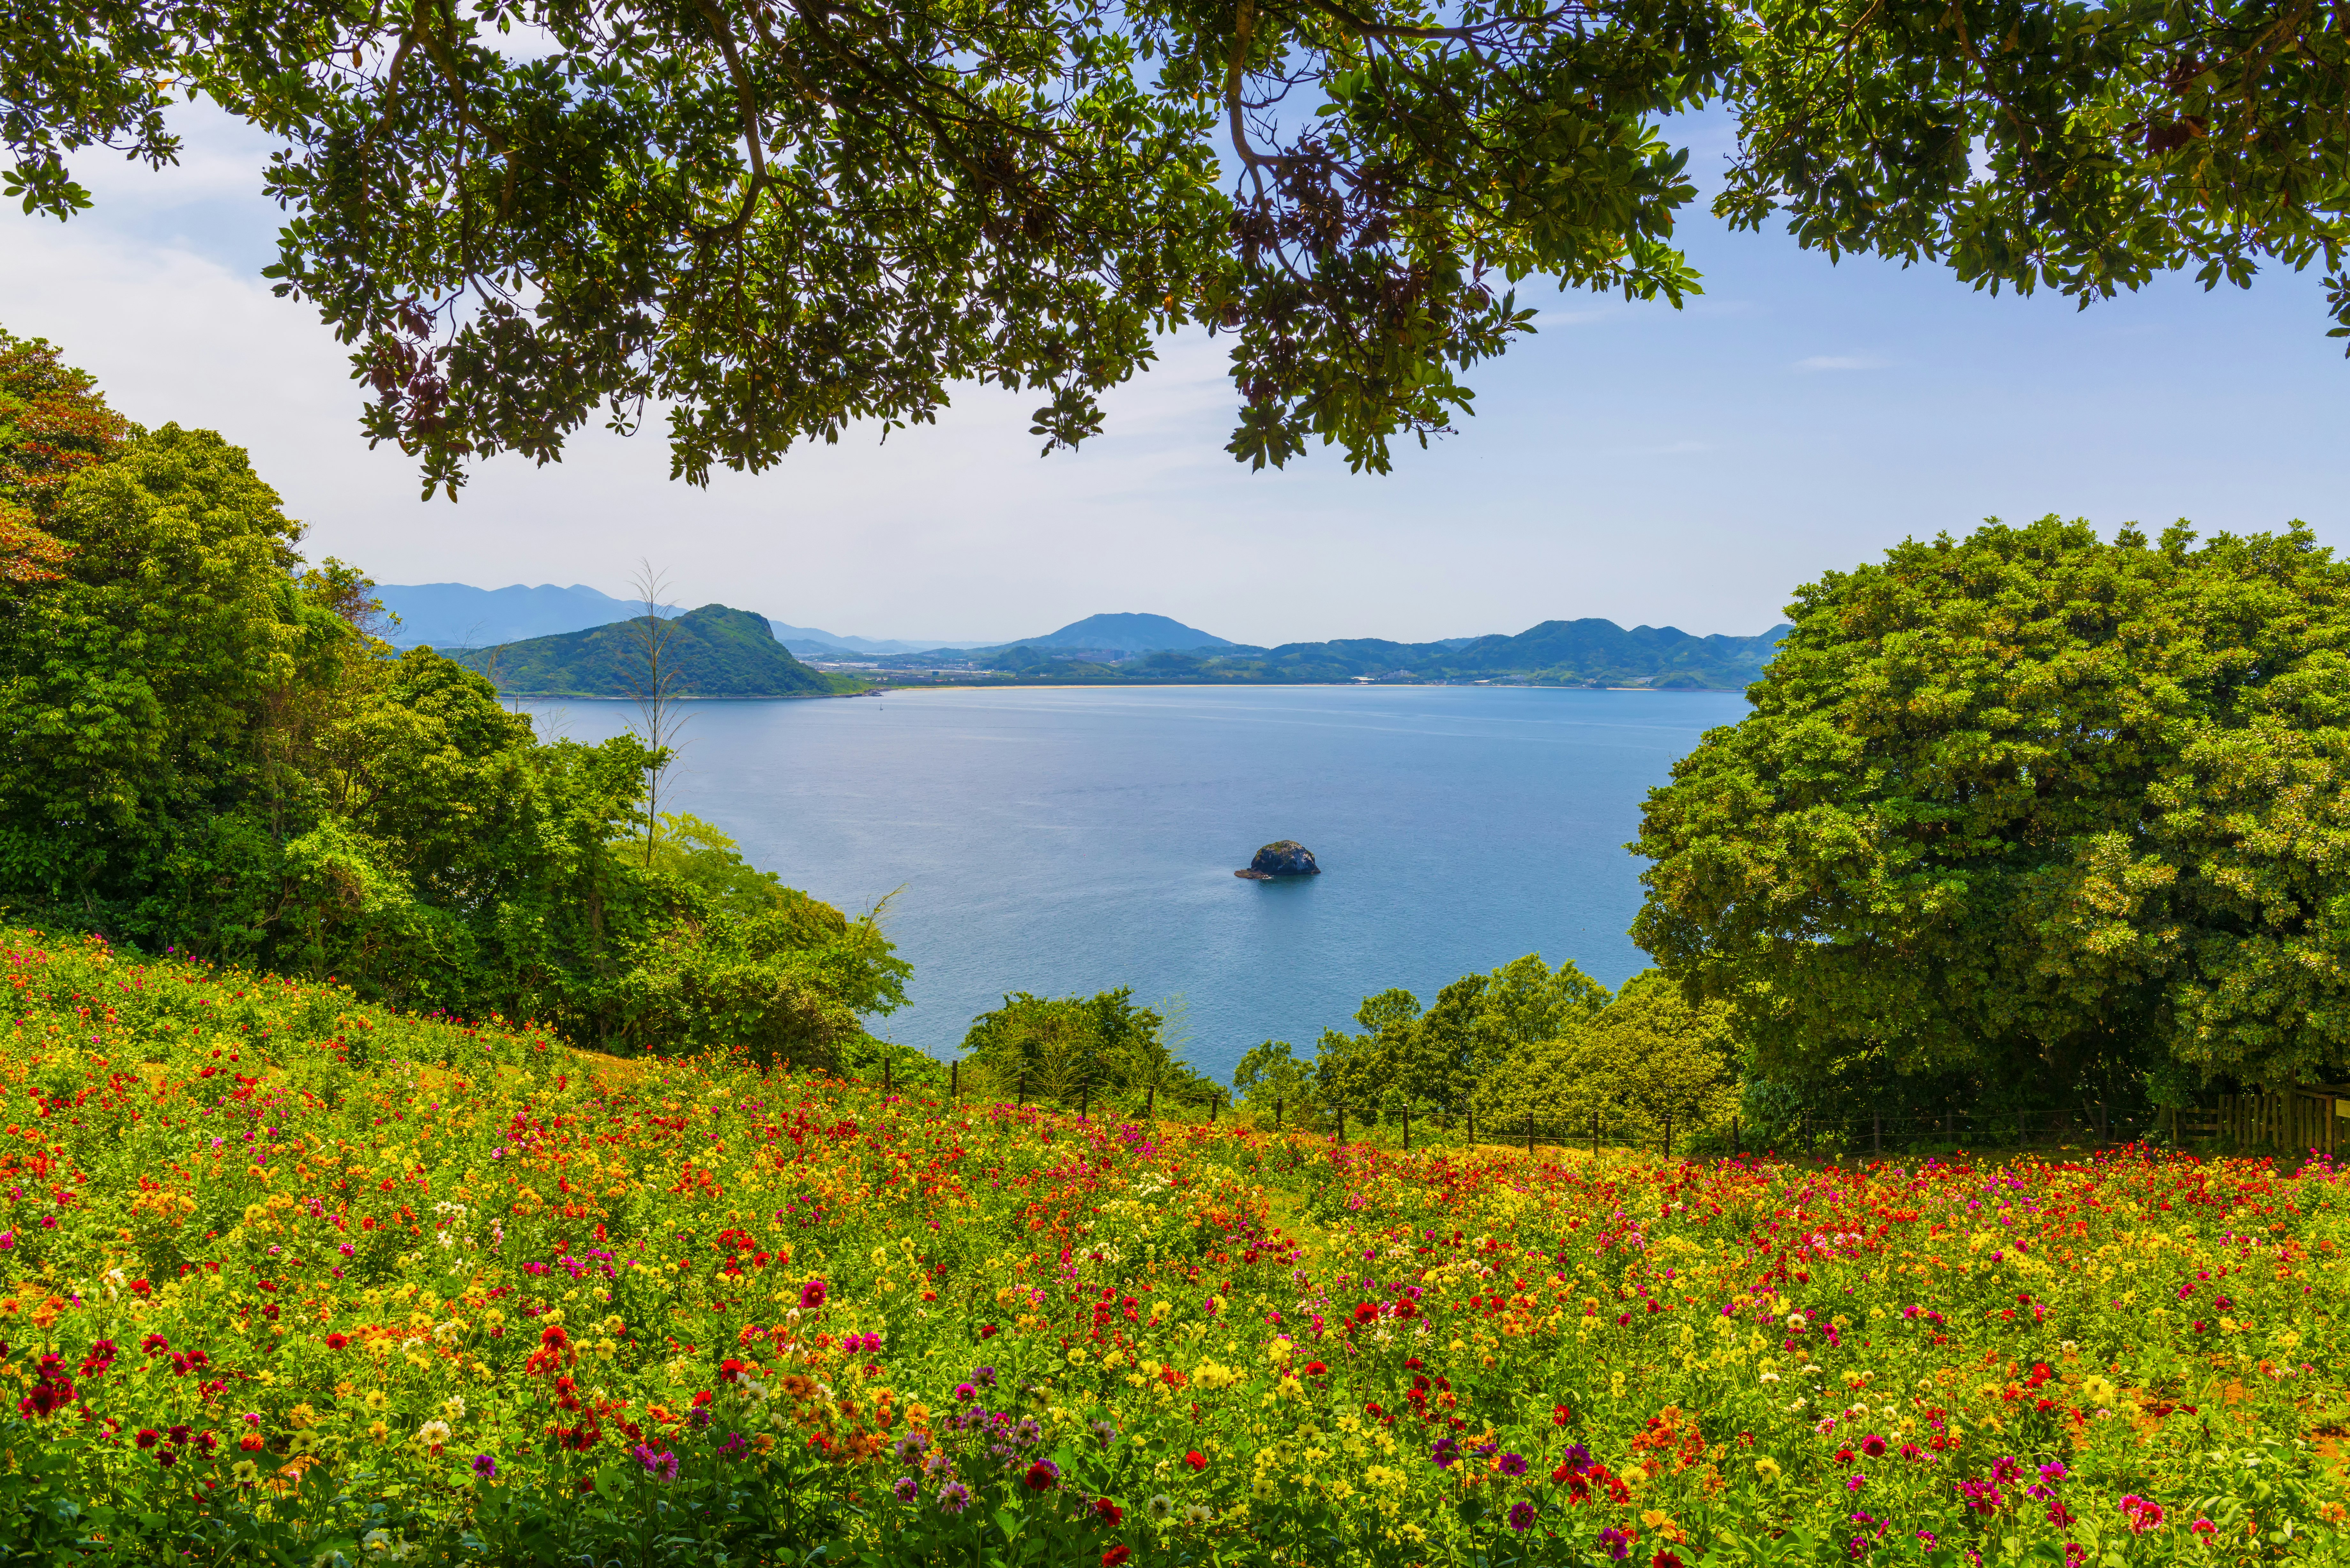 A view out to sea from Nokonoshima Island Park, with trees and a meadow of colourful wildflowers in the foreground, and part of a rocky coastline in the distance.